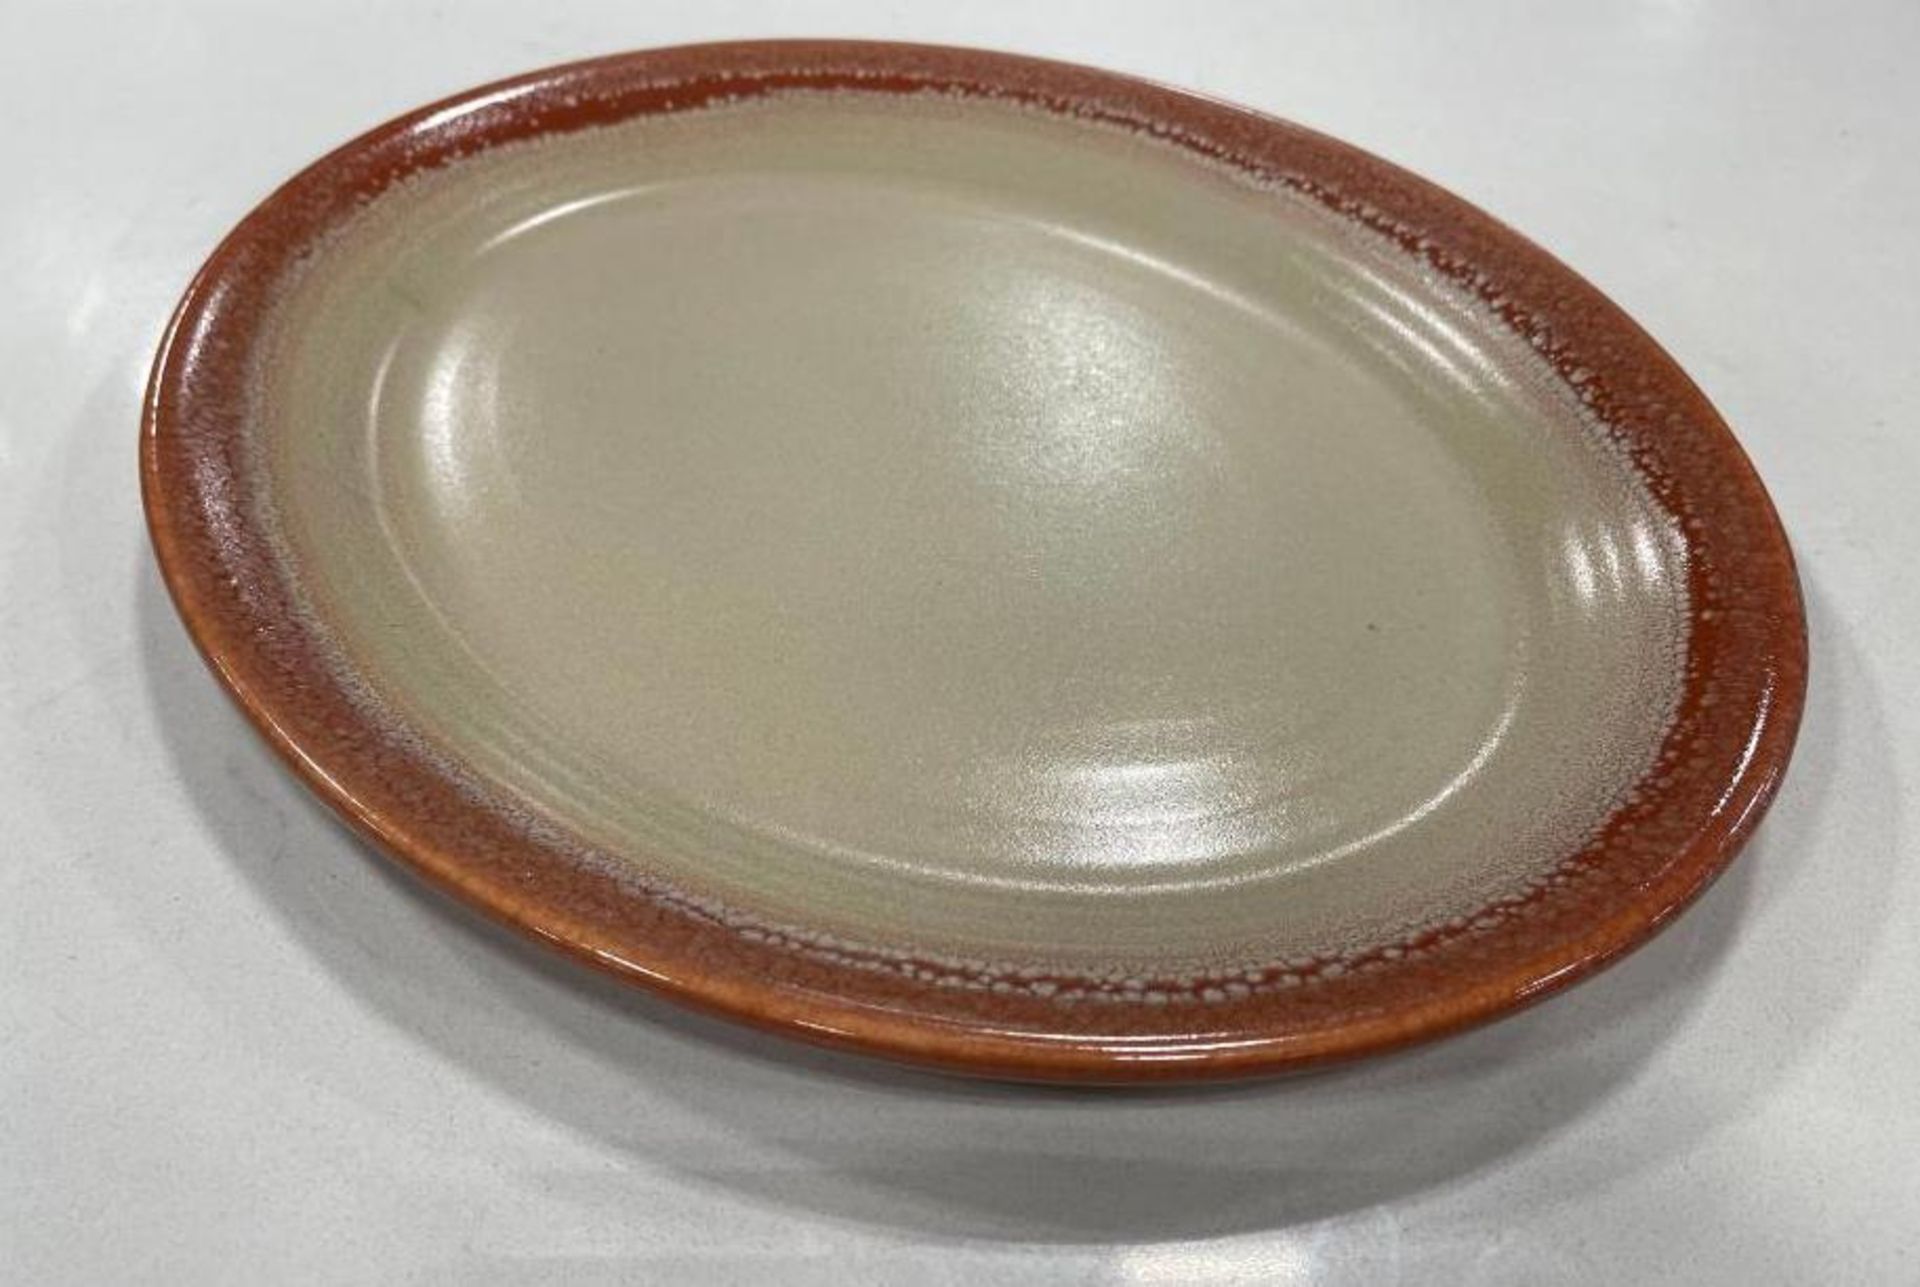 6 CASES OF DUDSON TERRACOTTA & SAND 11 1/4" OVAL PLATE - 12/CASE, MADE IN ENGLAND - Image 4 of 5